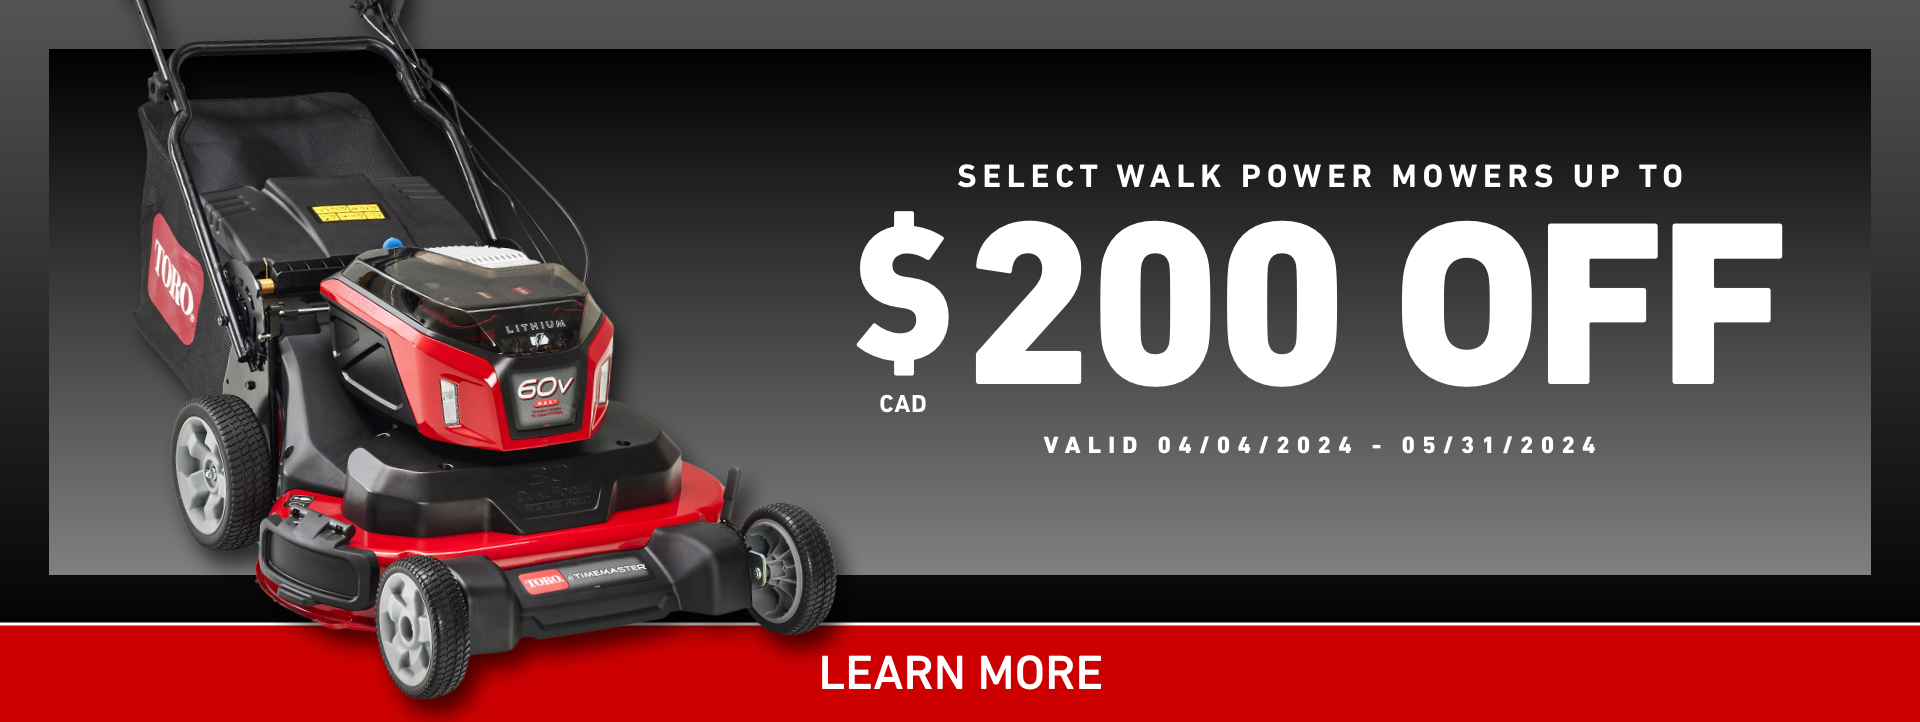 Toro Spring Sale - Save up to $200 off select walk power mowers